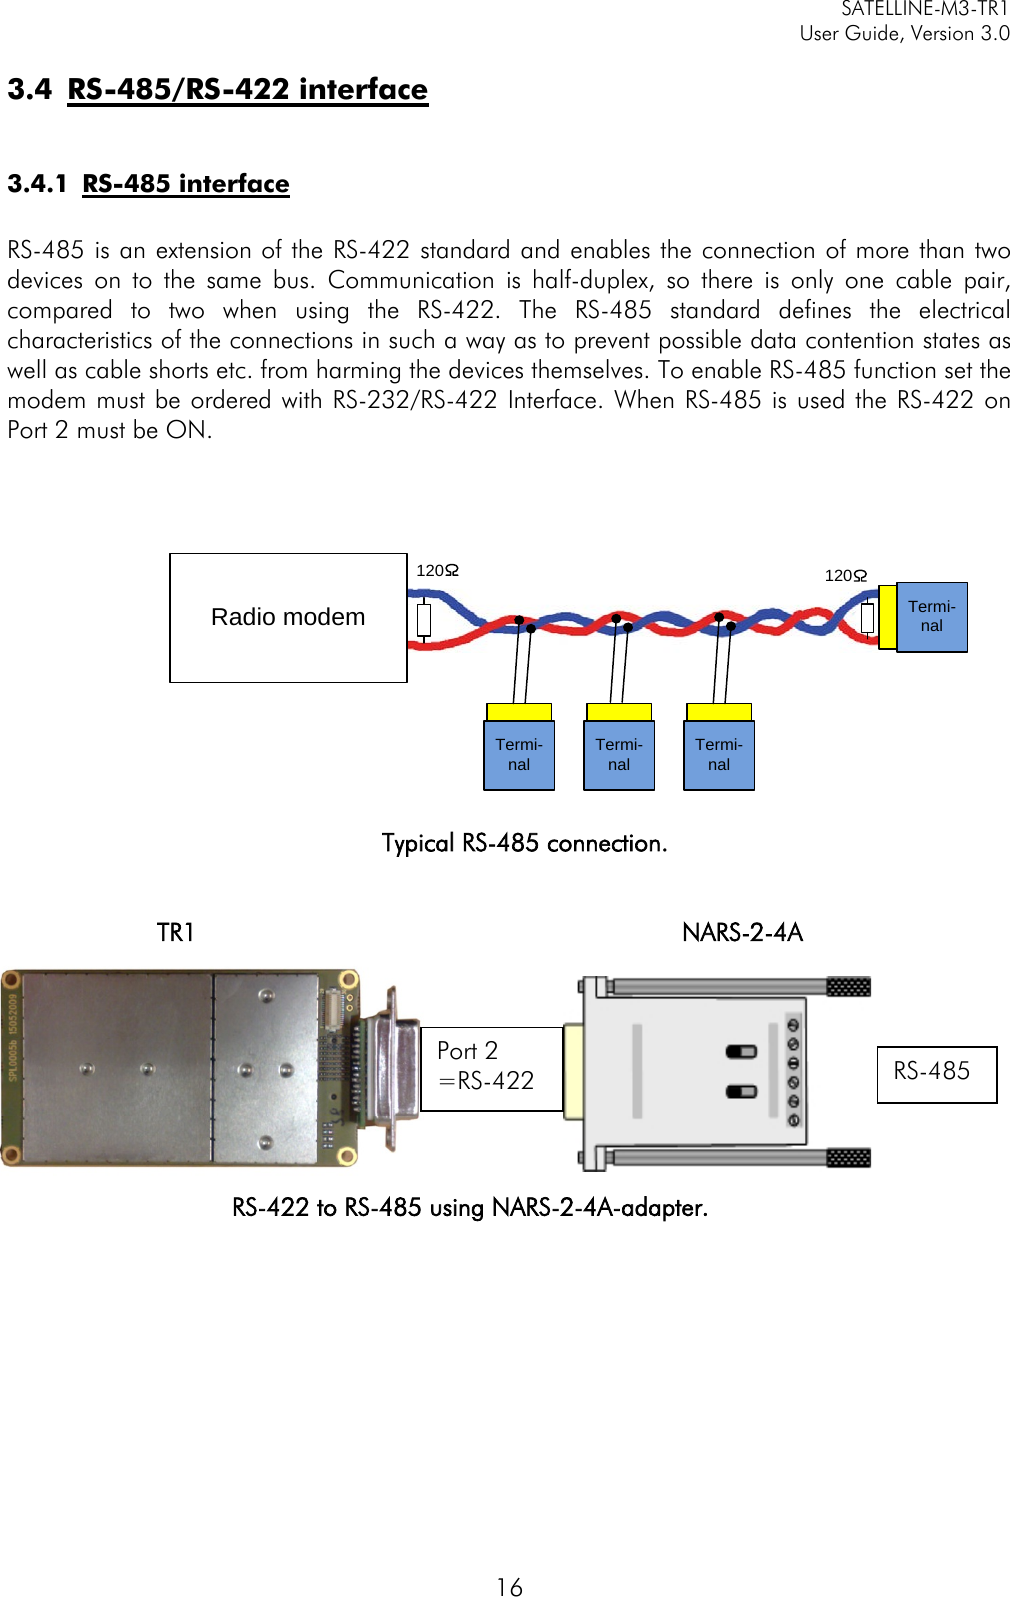     SATELLINE-M3-TR1     User Guide, Version 3.0  16 3.4 RS-485/RS-422 interface  3.4.1 RS-485 interface  RS-485 is an extension of the RS-422 standard and enables the connection of more than two devices on to the same bus. Communication is half-duplex, so there is only one cable pair, compared to two when using the RS-422. The RS-485 standard defines the electrical characteristics of the connections in such a way as to prevent possible data contention states as well as cable shorts etc. from harming the devices themselves. To enable RS-485 function set the modem must be ordered with RS-232/RS-422 Interface. When RS-485 is used the RS-422 on Port 2 must be ON.   Typical RS-485 connection.   TR1        NARS-2-4A         RS-422 to RS-485 using NARS-2-4A-adapter.           Port 2 =RS-422 RS-485 Termi-nalTermi-nalTermi-nal Termi-nal 120120Radio modem